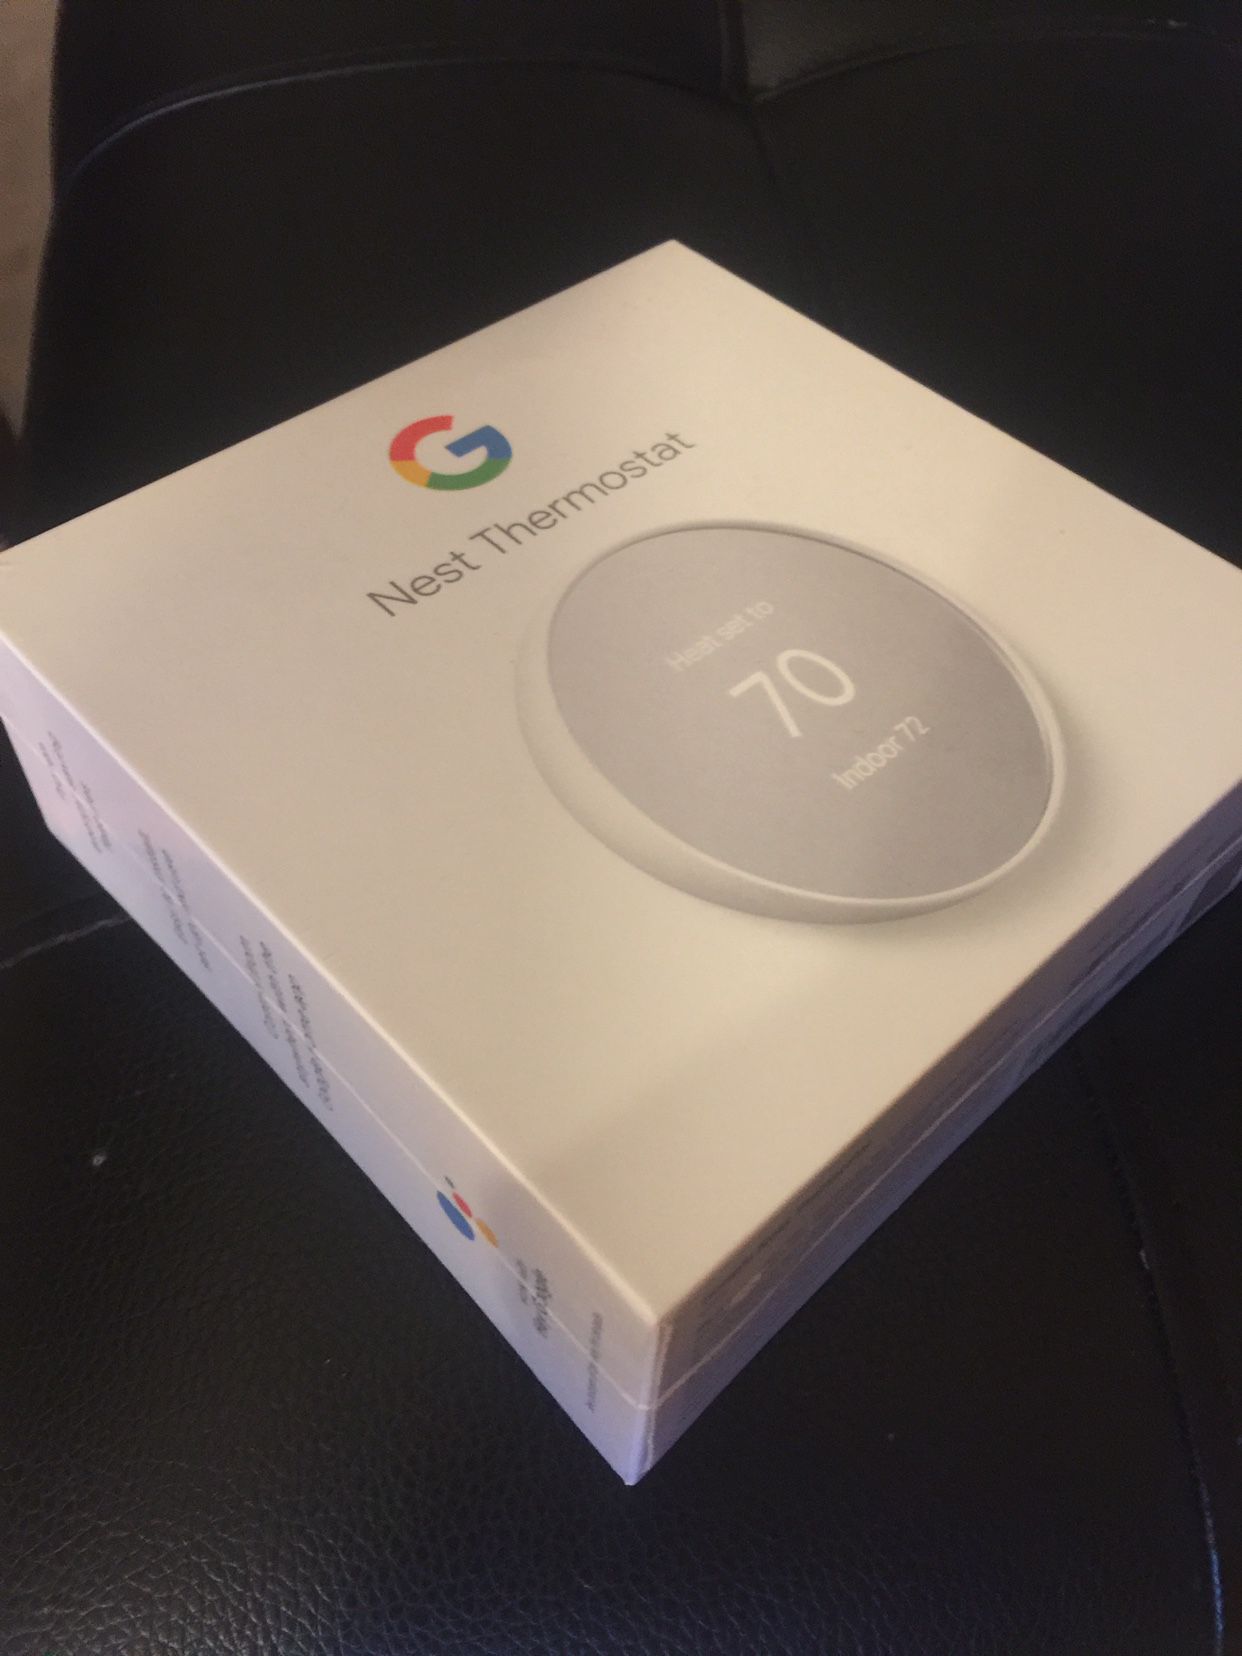 Google Nest Thermostat - New In Box!